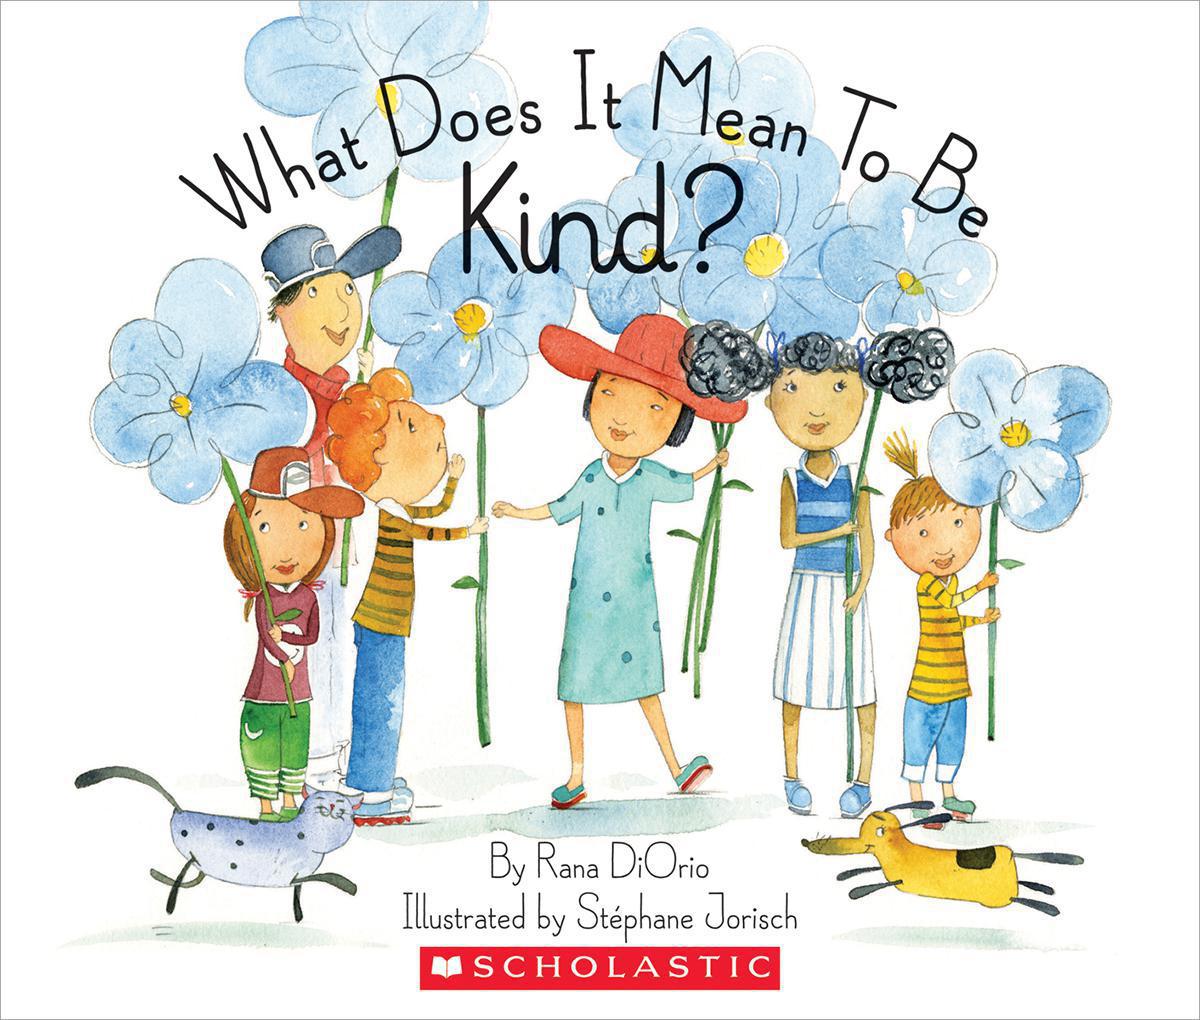  What Does It Mean to Be Kind? 